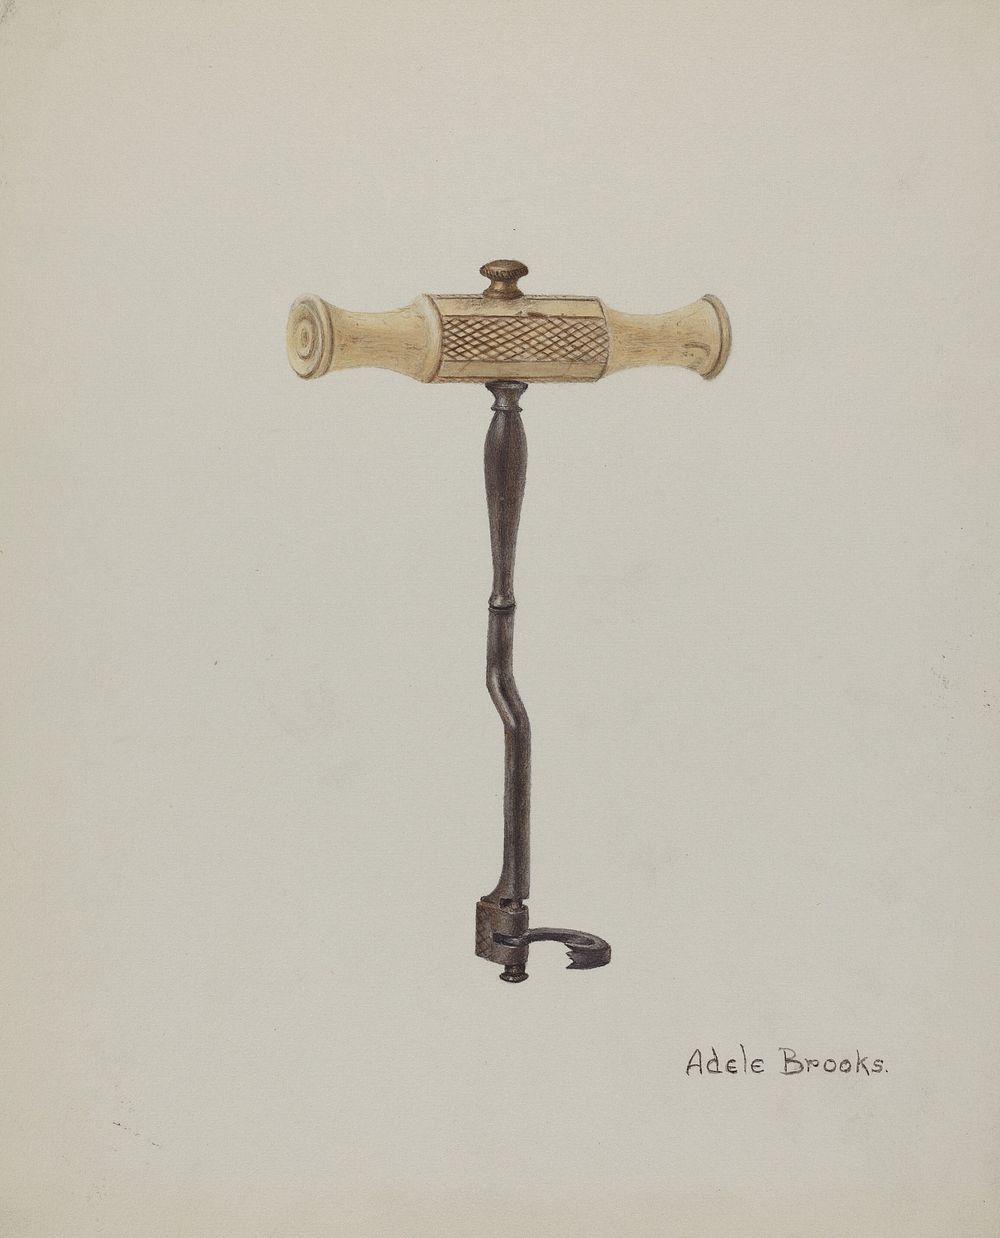 Tooth Key (or Tooth Extractor), (1935&ndash;1942) by Adele Brooks.  